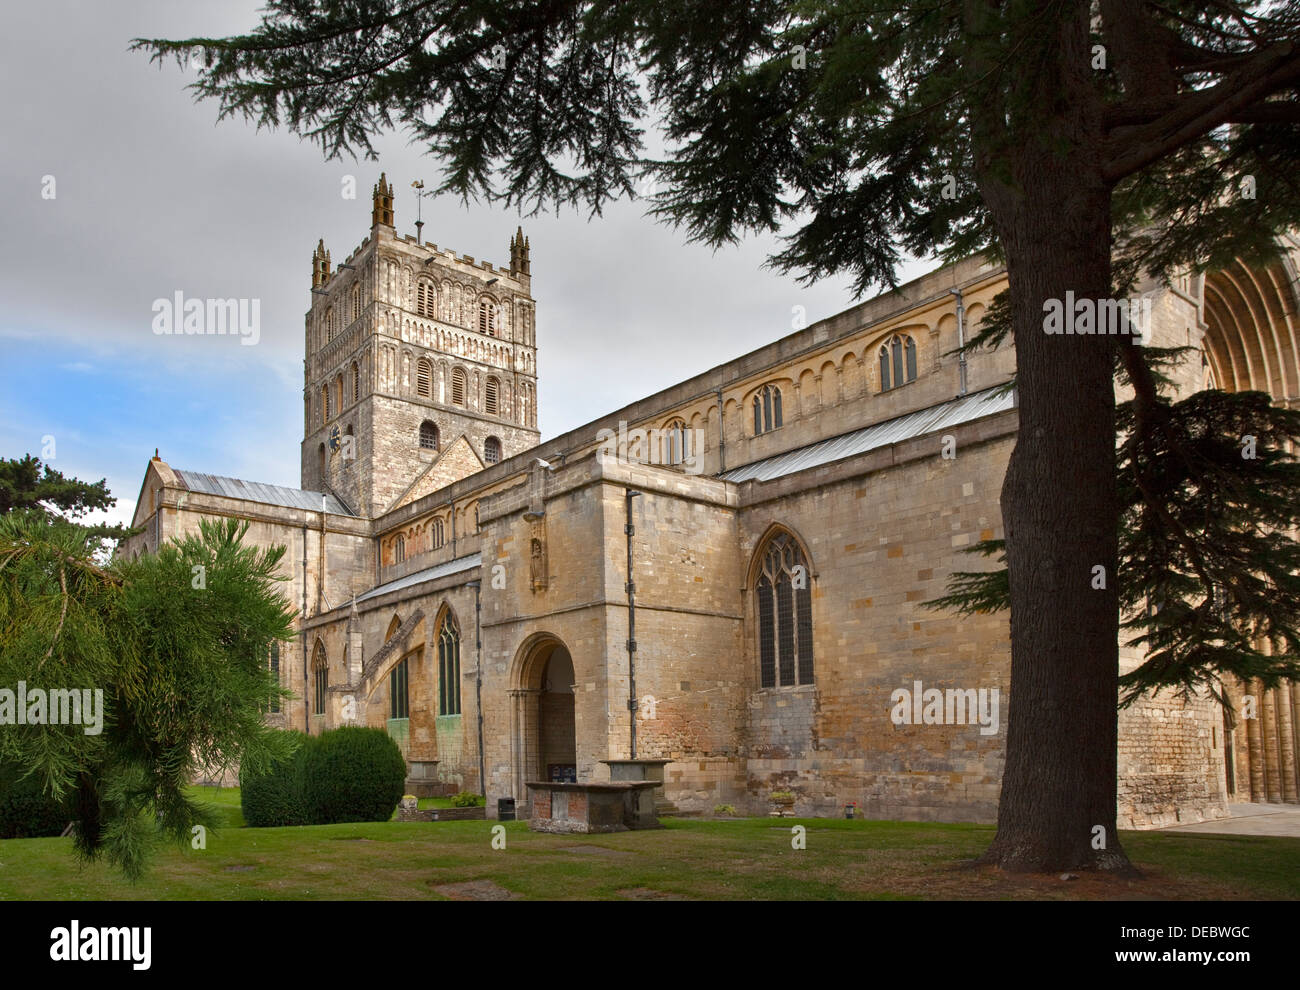 The Abbey of the Blessed Virgin Mary, Tewkesbury, Gloucestershire, England Stock Photo